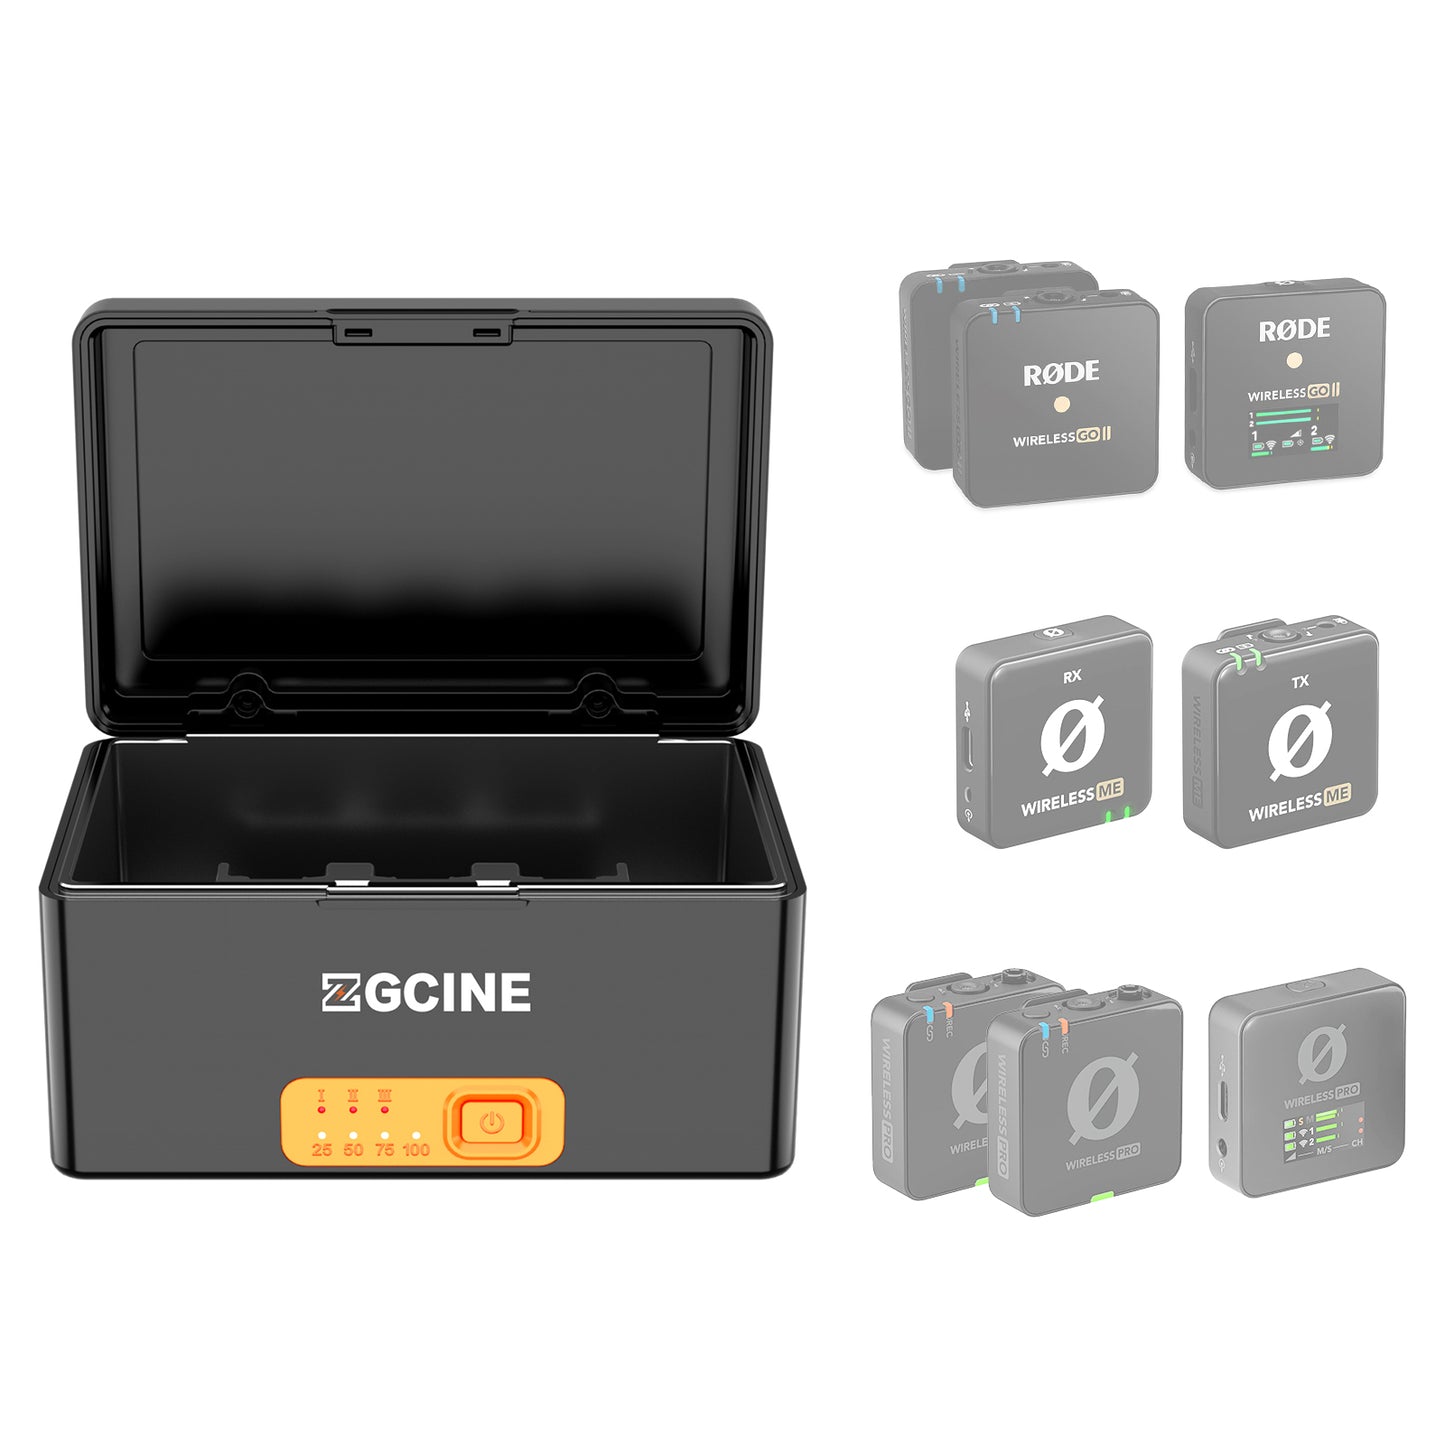 ZGCINE ZG-R30Pro Charging Case for Rode Microphones Wireless GO / Wireless ME/ Wireless Pro